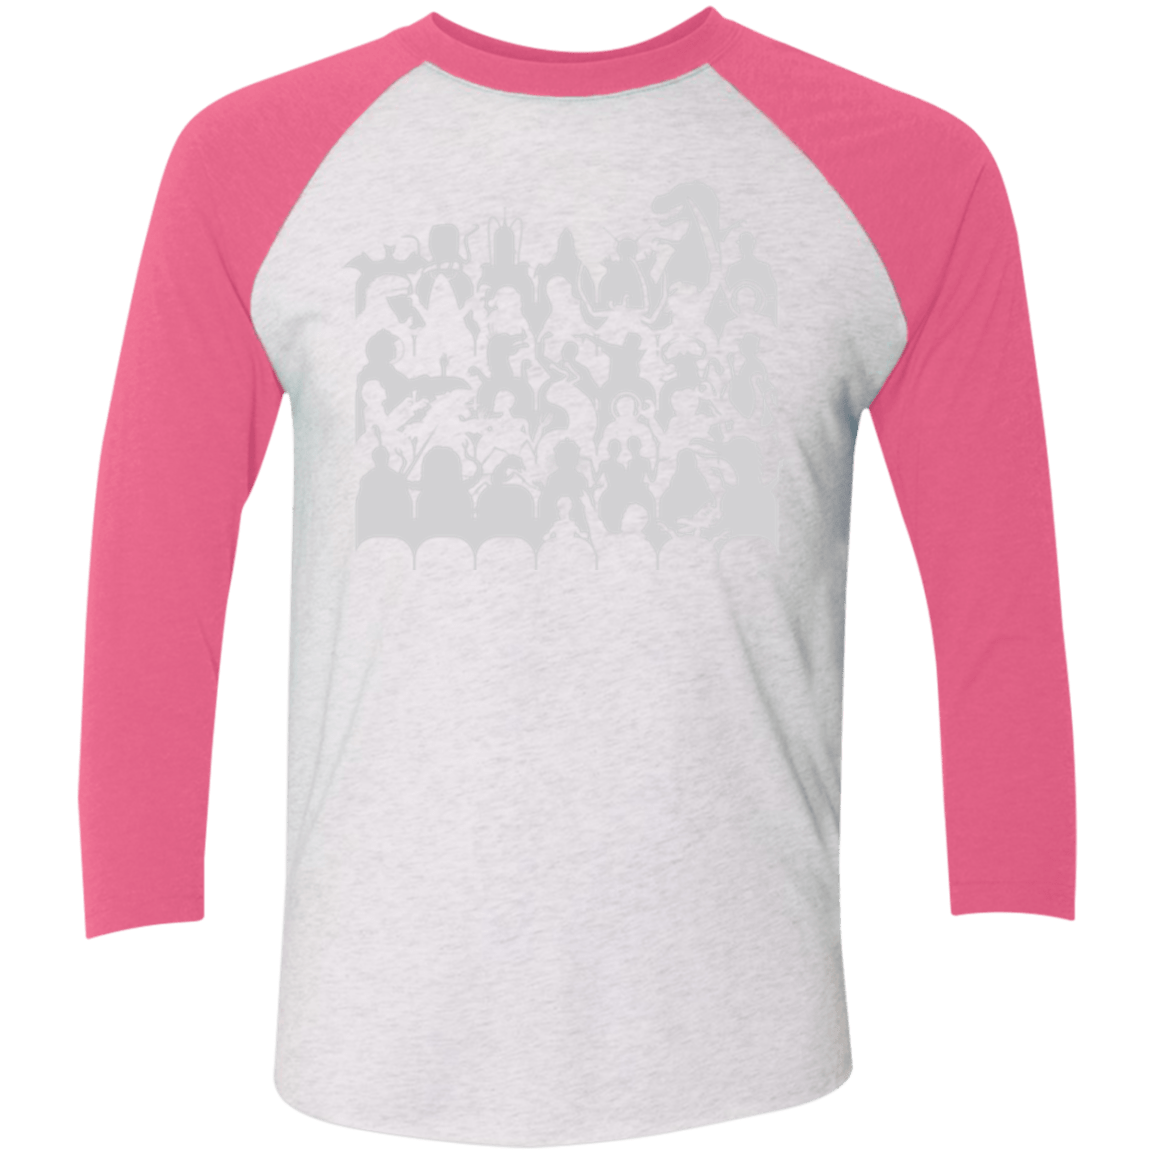 T-Shirts Heather White/Vintage Pink / X-Small MST3K Men's Triblend 3/4 Sleeve